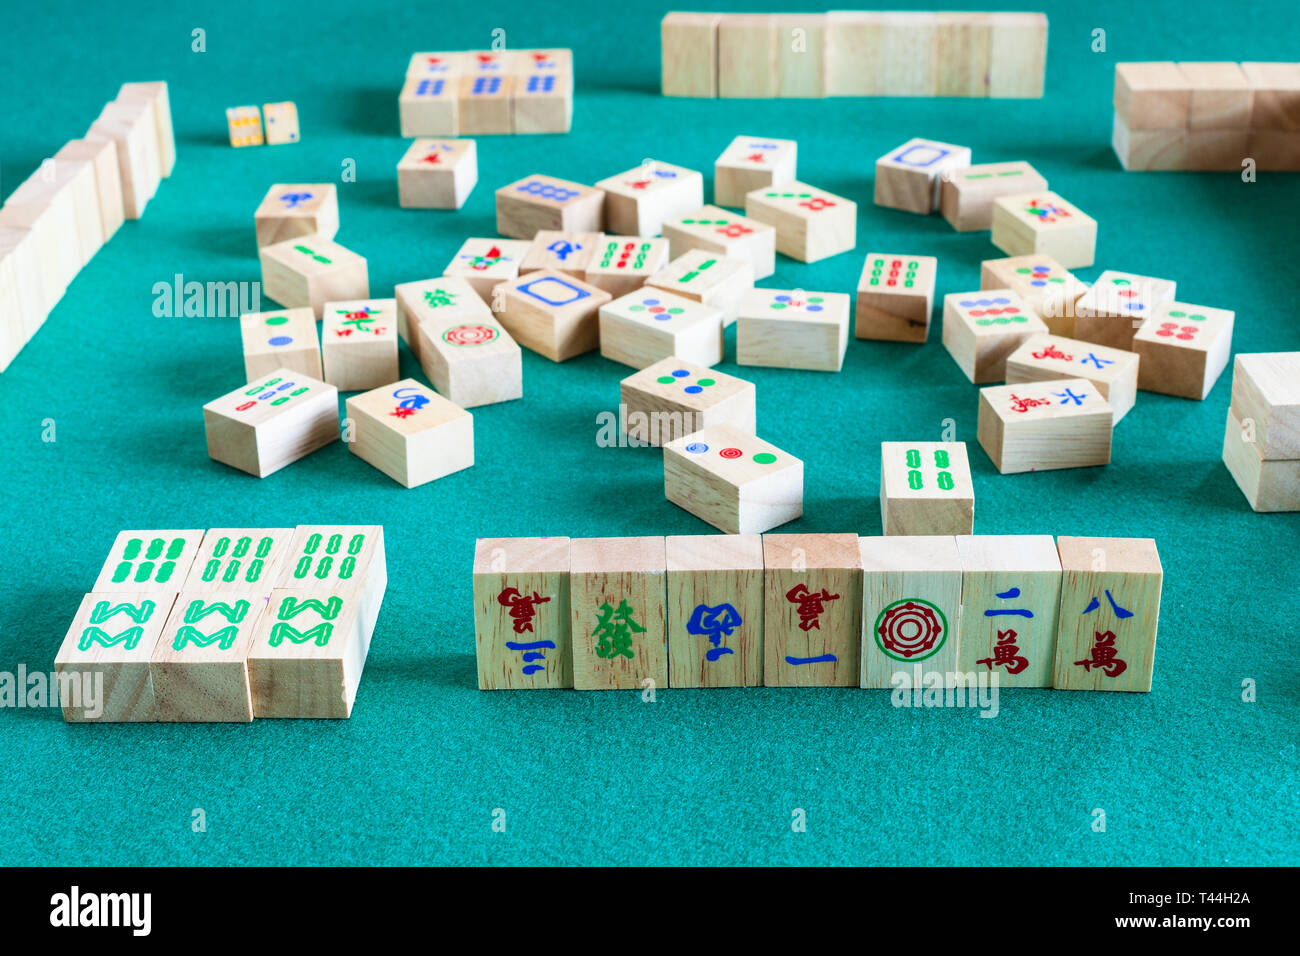 side view of gameboard of mahjong game, tile-based chinese strategy board game on green baize table Stock Photo